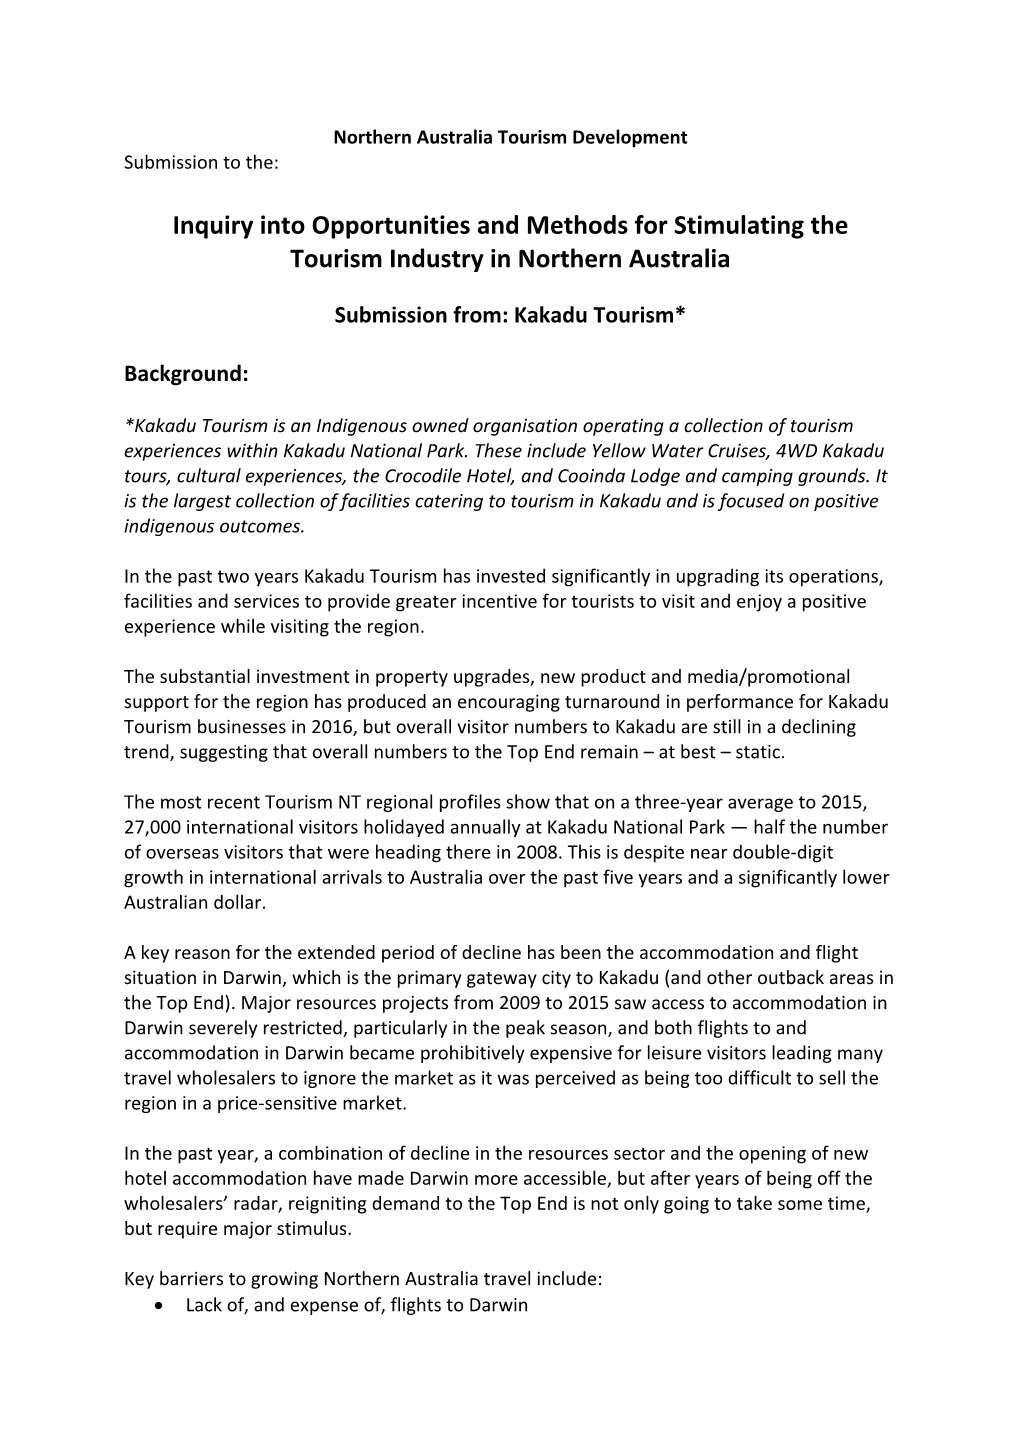 Inquiry Into Opportunities and Methods for Stimulating the Tourism Industry in Northern Australia